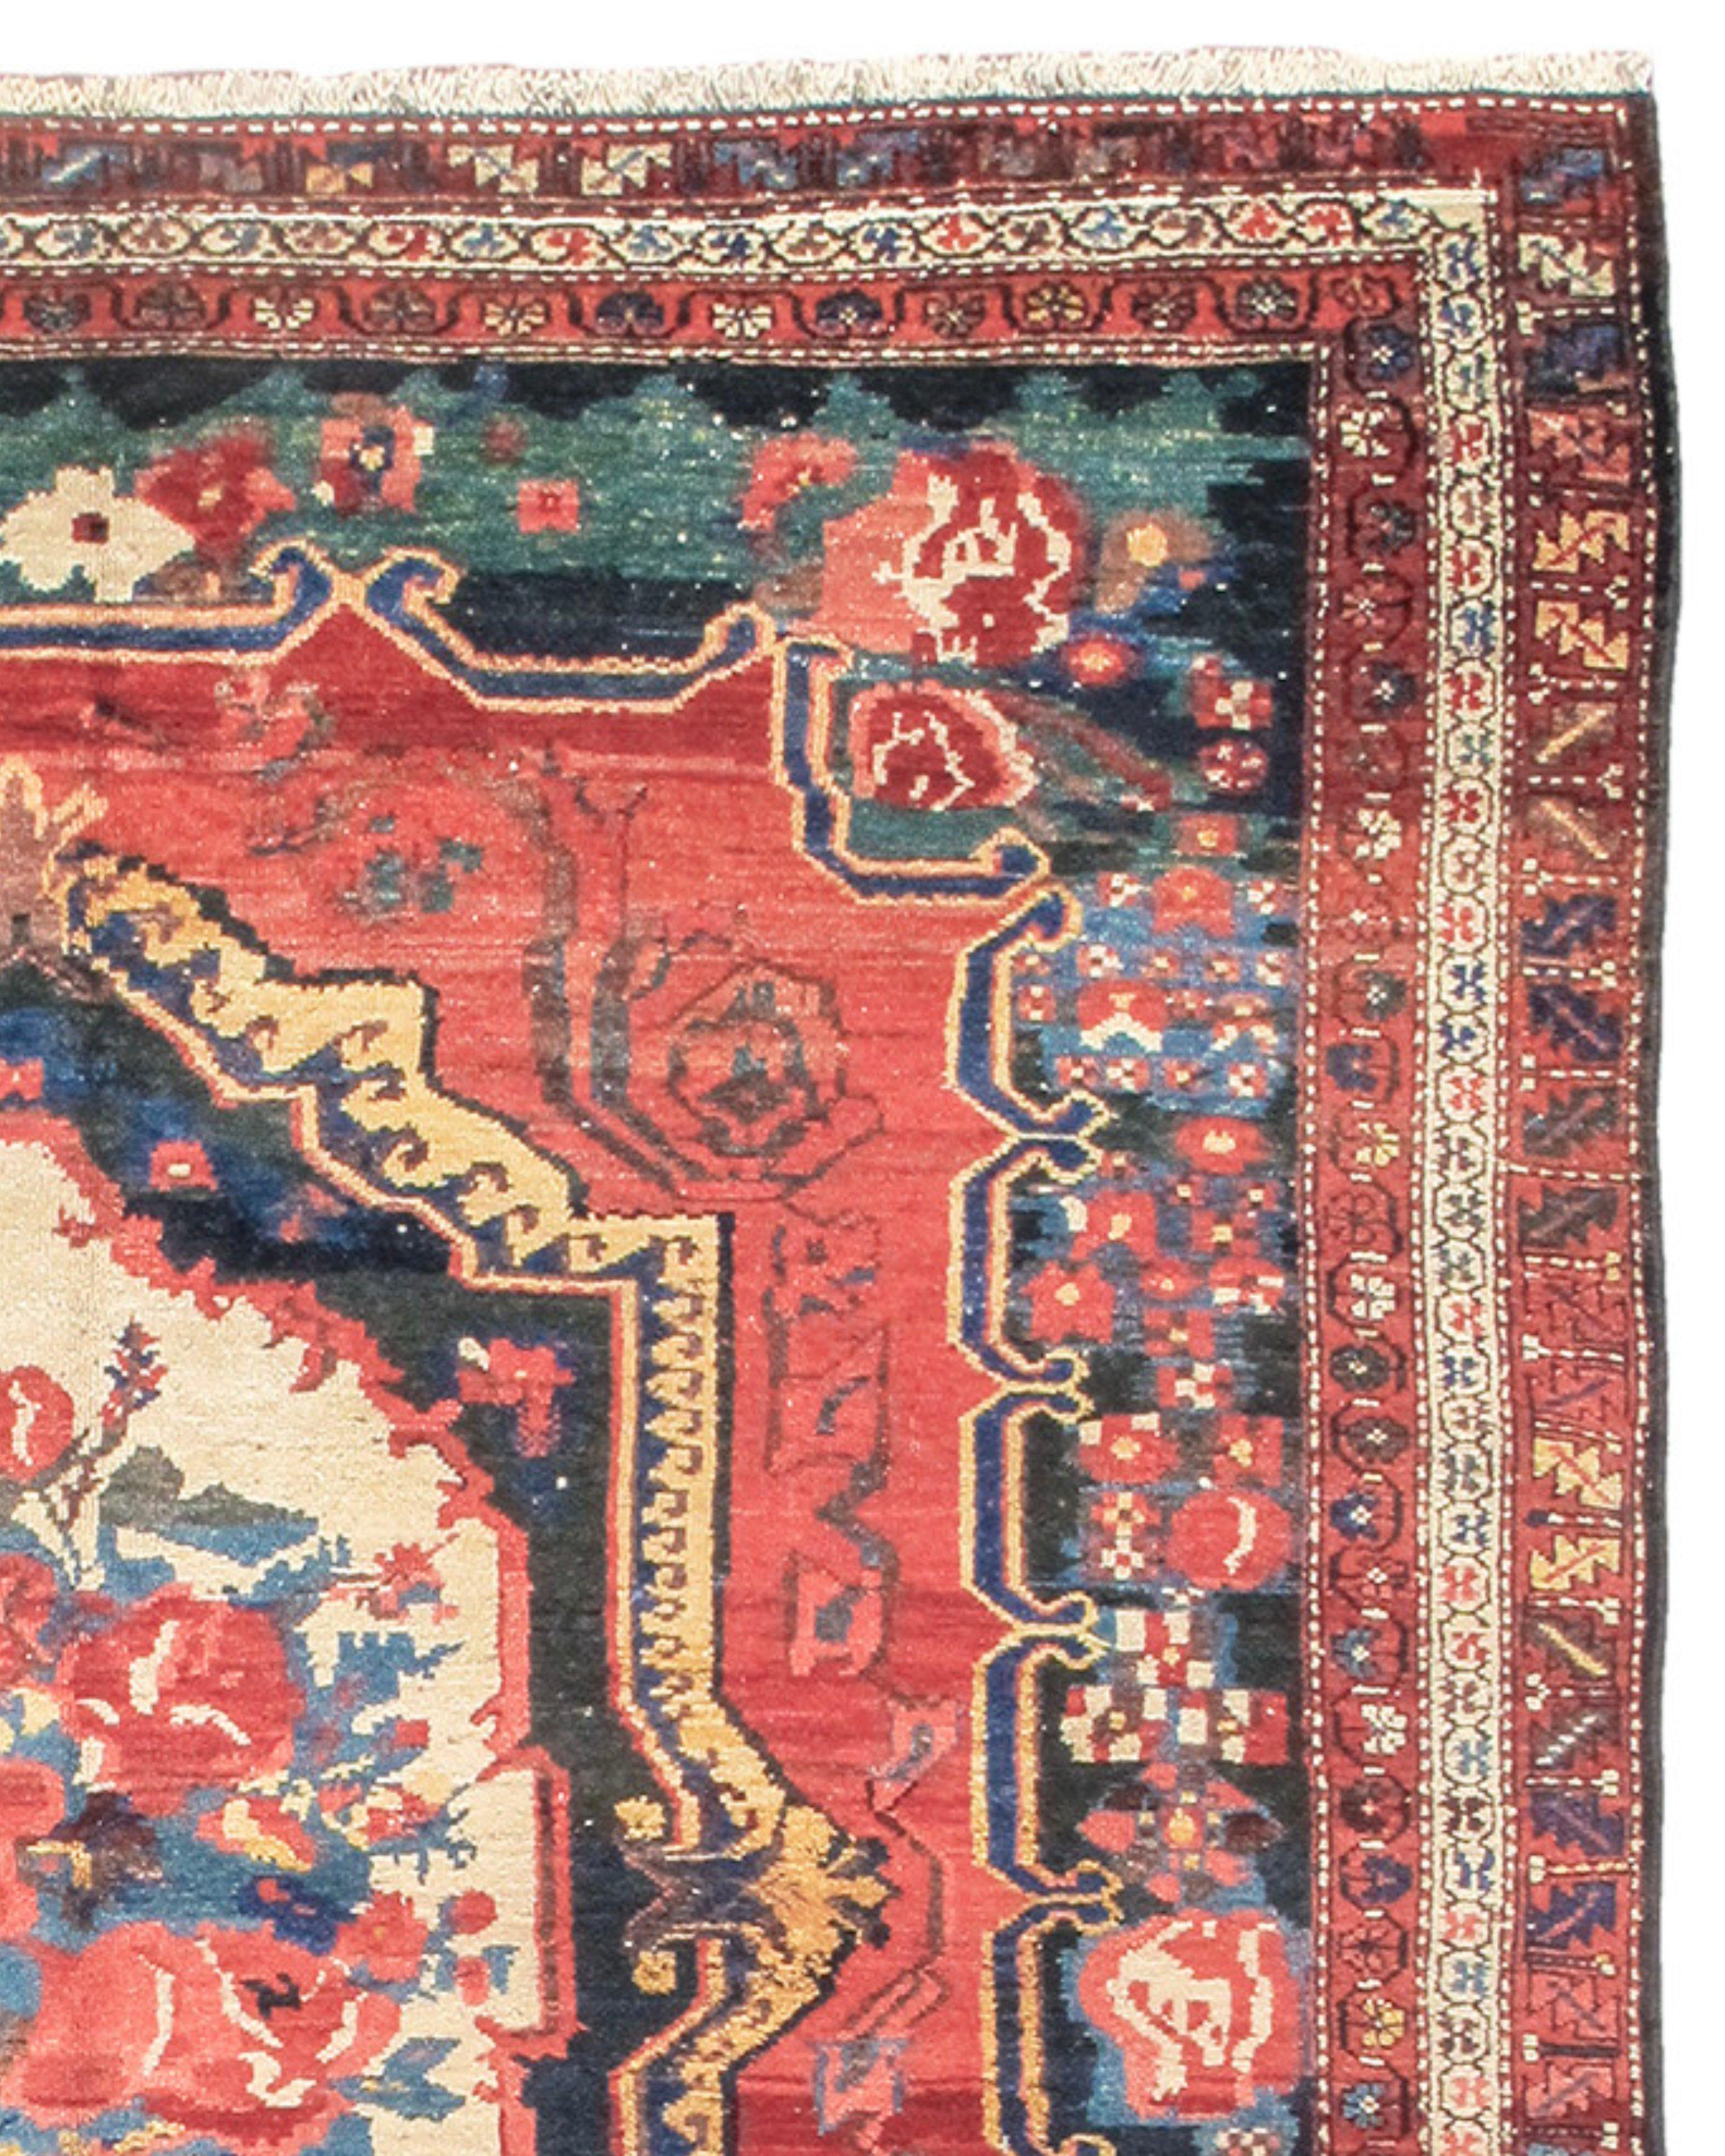 Bakhtiari Rug, Early 20th Century

Additional Information:
Dimensions: 5'9